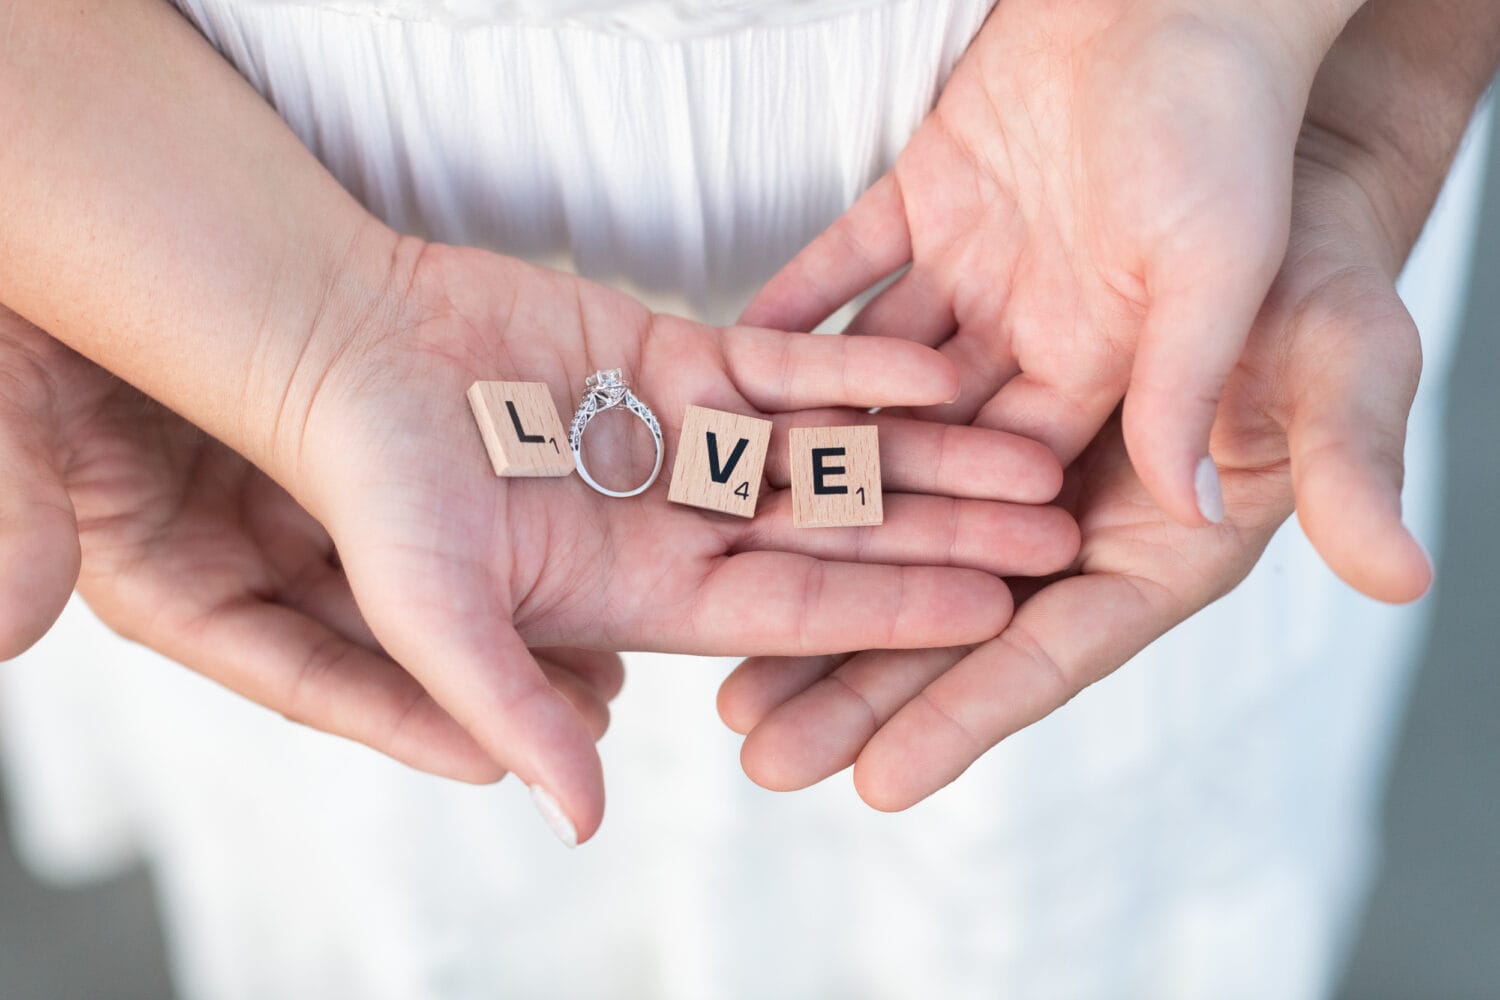 Spelling love with ring and scrabble pieces  - Huntington Beach State Park